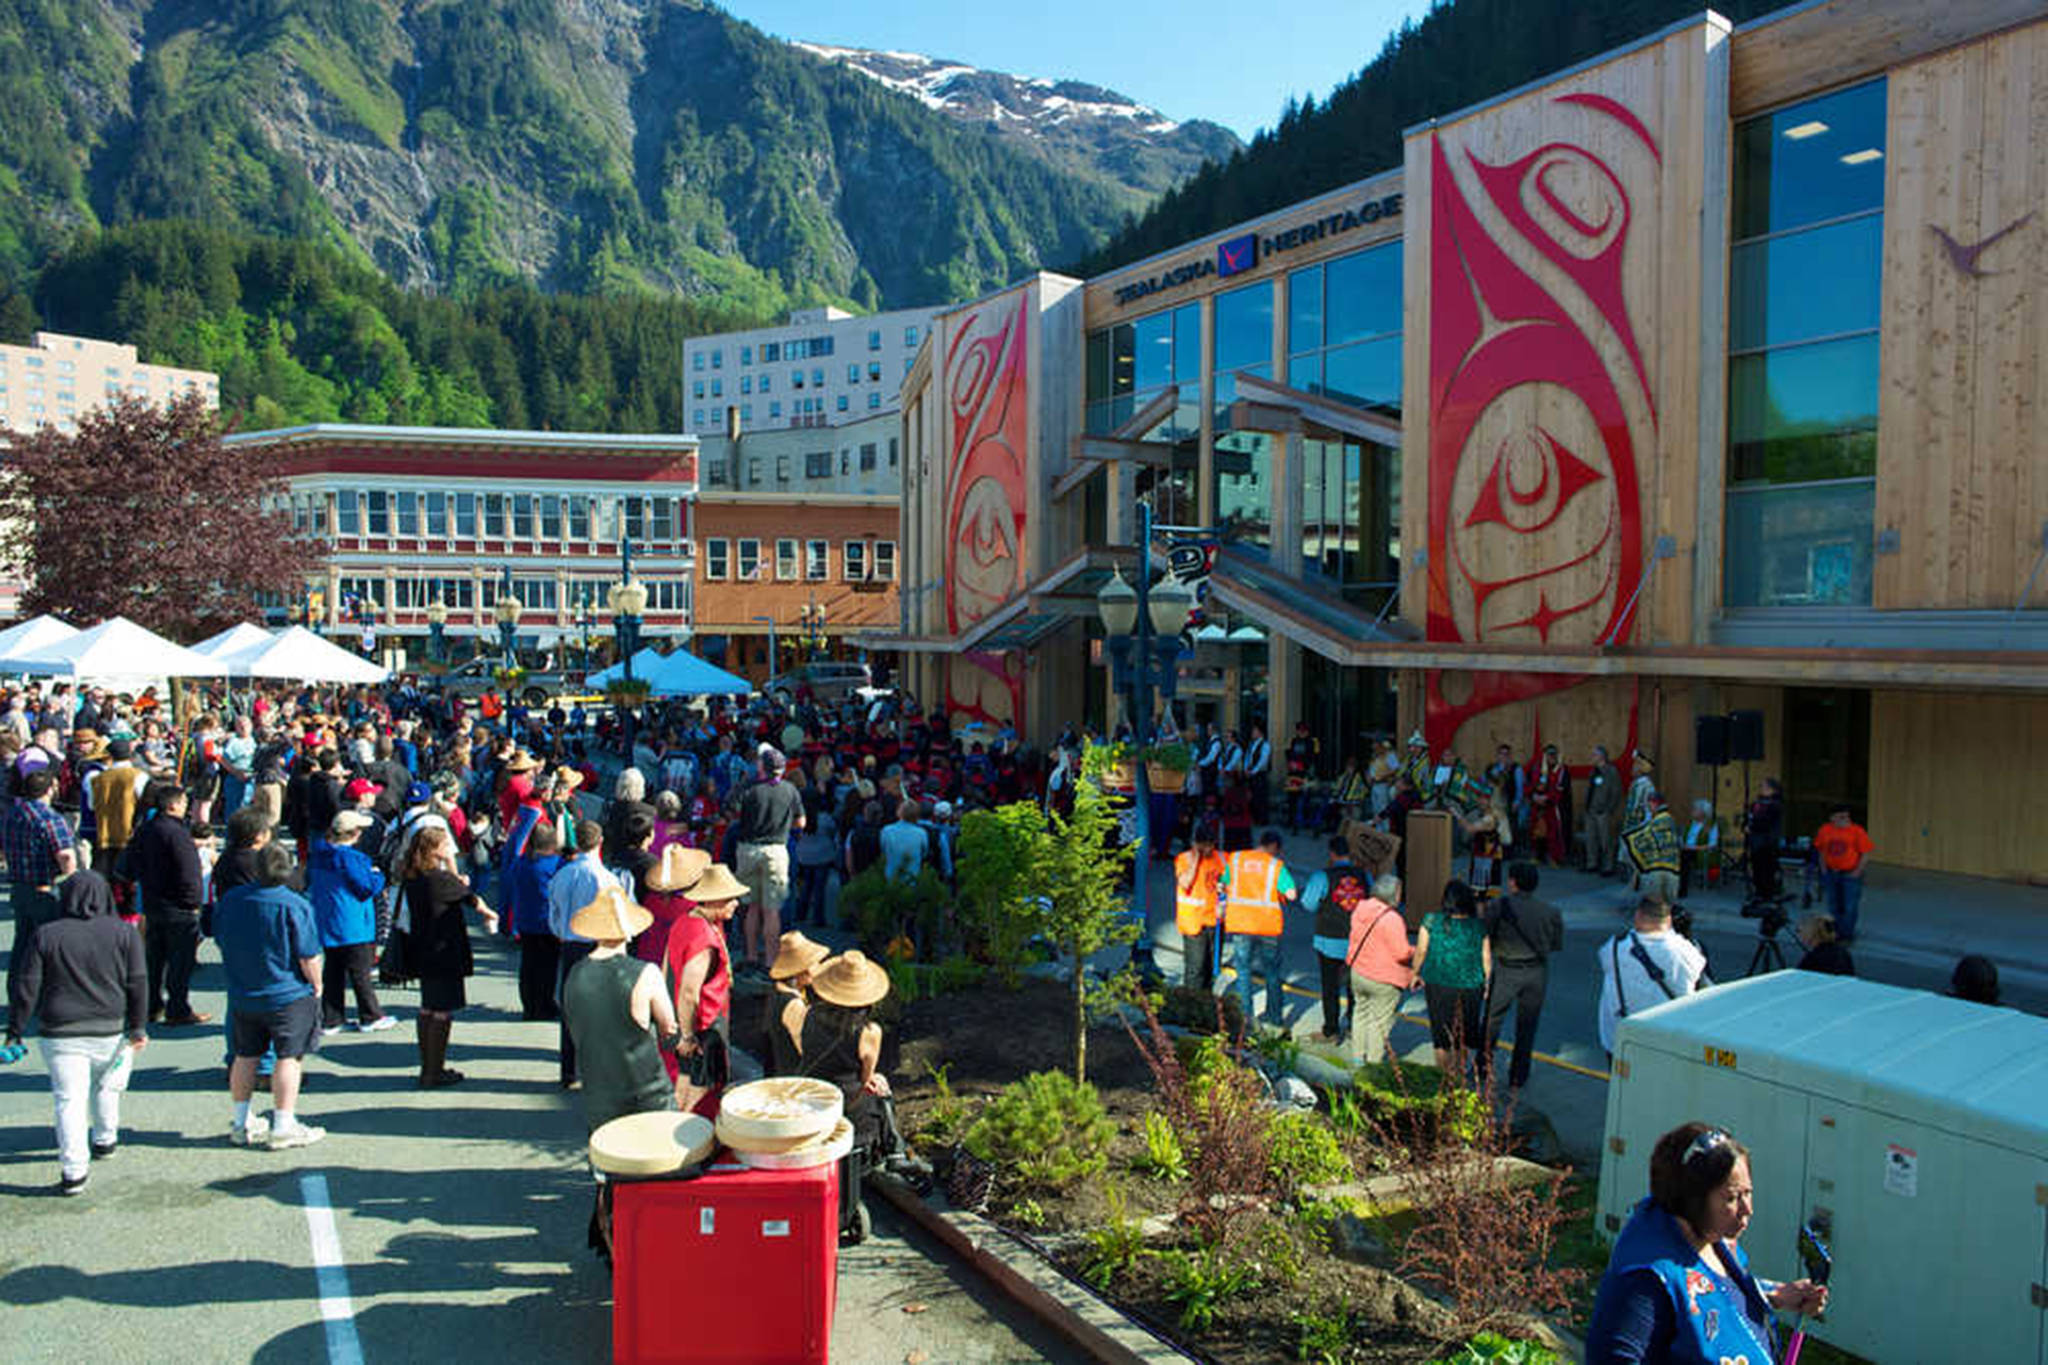 Sealaska Heritage Institute means millions of dollars to Juneau, study finds